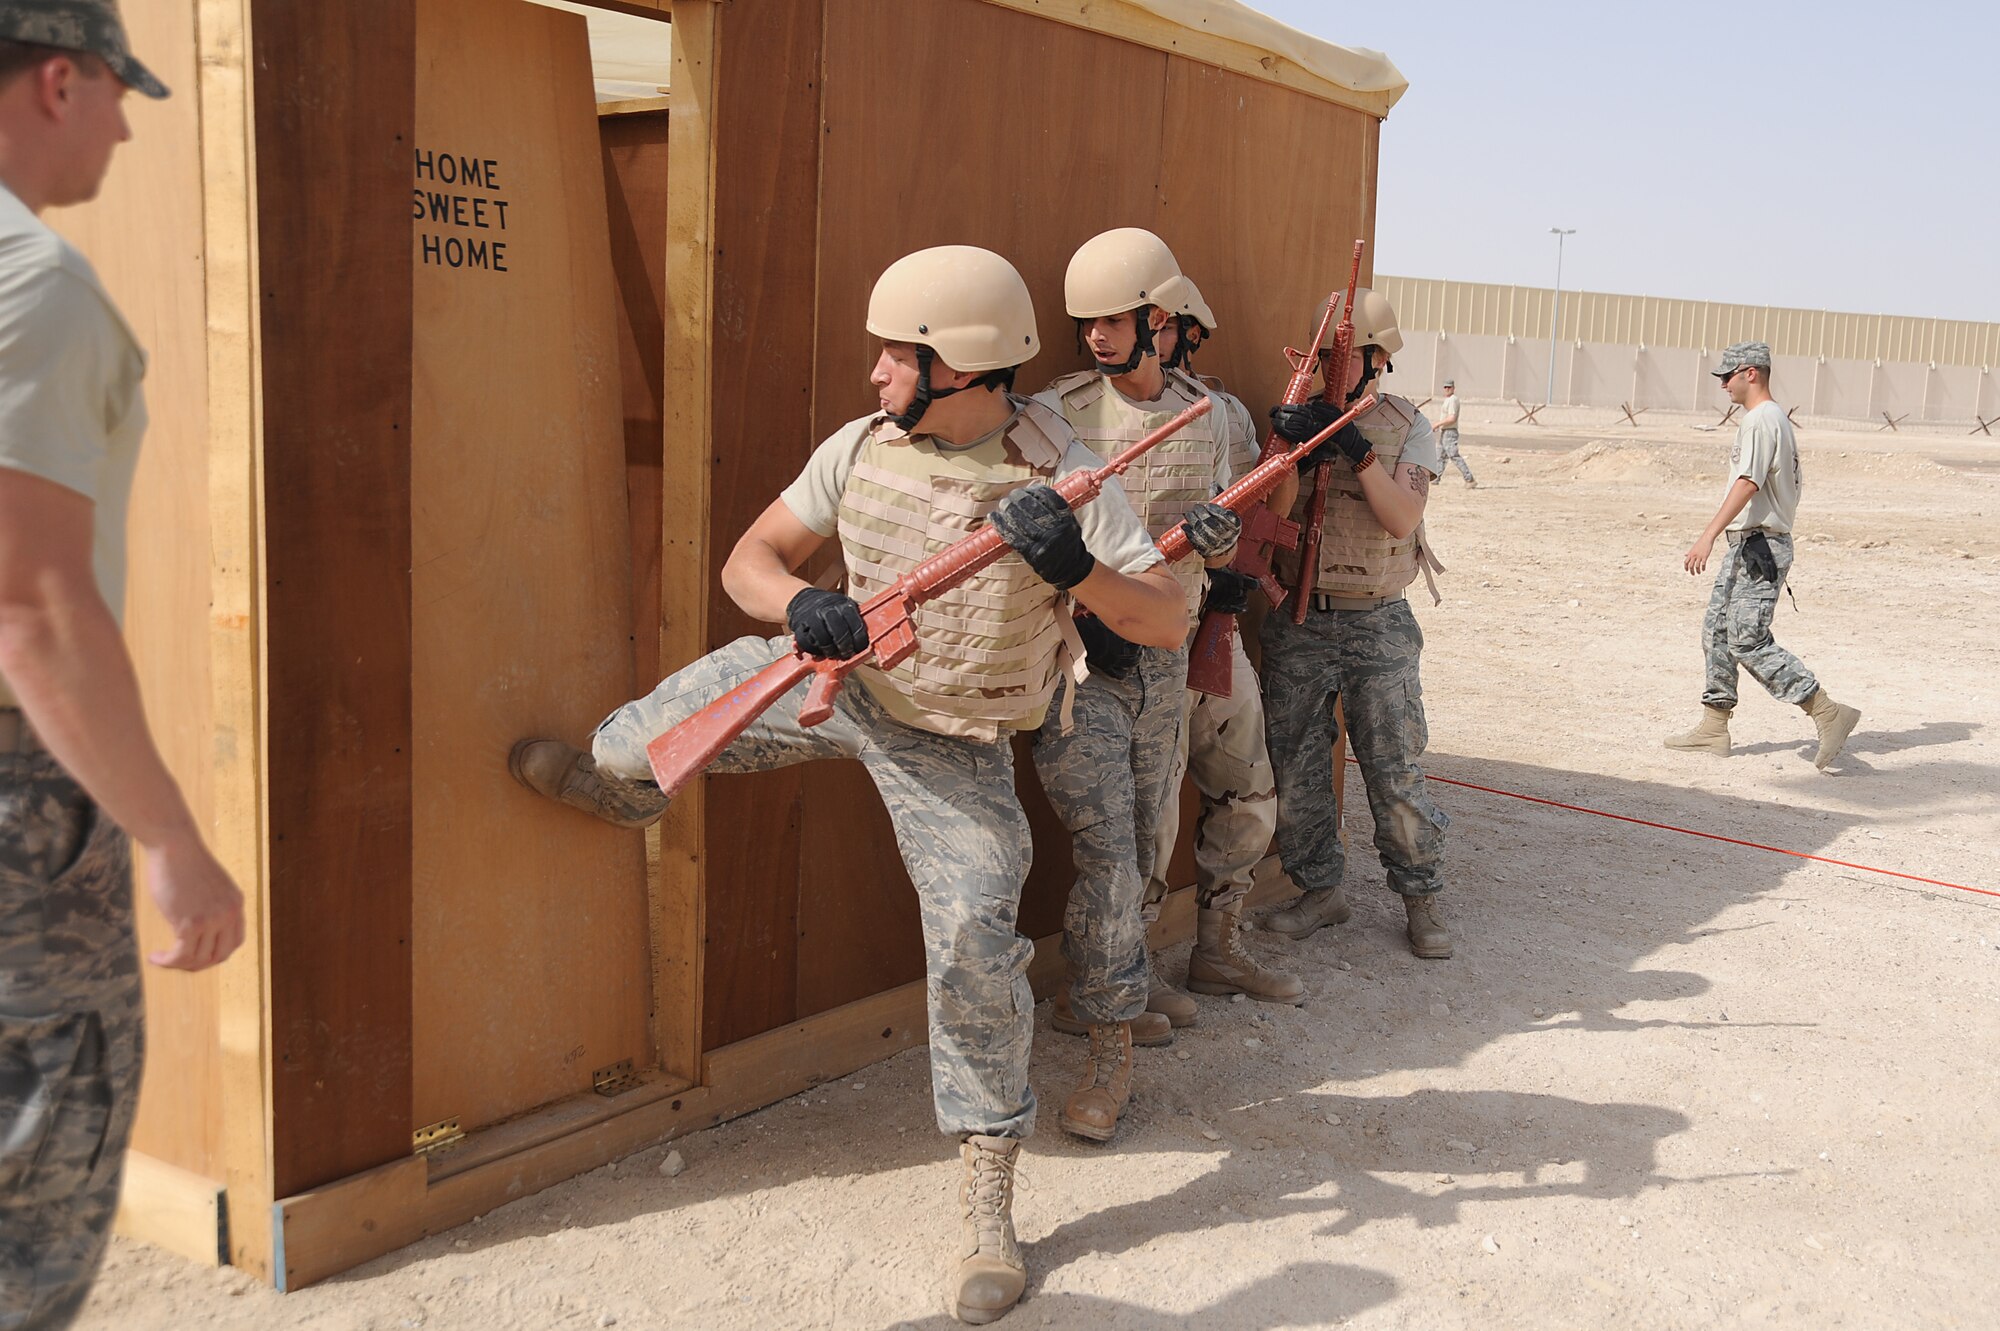 Senior Airman Matthew McCarthy kicks down a door on a tactical entry trainer as Staff Sgt. Cory Bobo, Senior Airman Paulo Giraldo and Senior Airman Erin Kinney wait to enter during a Defender Challenge course, April 25 at an undisclosed location in Southwest Asia. At the end of the course the team would have to identify everything they saw inside to earn points towards their score. Airman McCarthy, Sergeant Bobo and Airman Giraldo are with the 380th Expeditionary Civil Engineer Squadron and Airman Kinney is with the 380th Expeditionary Security Forces Squadron. The team won the competition beating out second place by one second. Airman McCarthy is deployed from Bolling AFB, Wash. D.C. and hails from Omaha, Neb. Sergeant Bobo is deployed from Aviano AB, Italy and hails from Athens Ohio. Airman Giraldo is deployed form Bolling AFB, Wash. D.C. and hails from Revere, Mass. Airman Kinney is deployed from Tinker AFB, Okla. and hails from Austin, Texas. (U.S. Air Force photo by Senior Airman Brian J. Ellis) (Released)